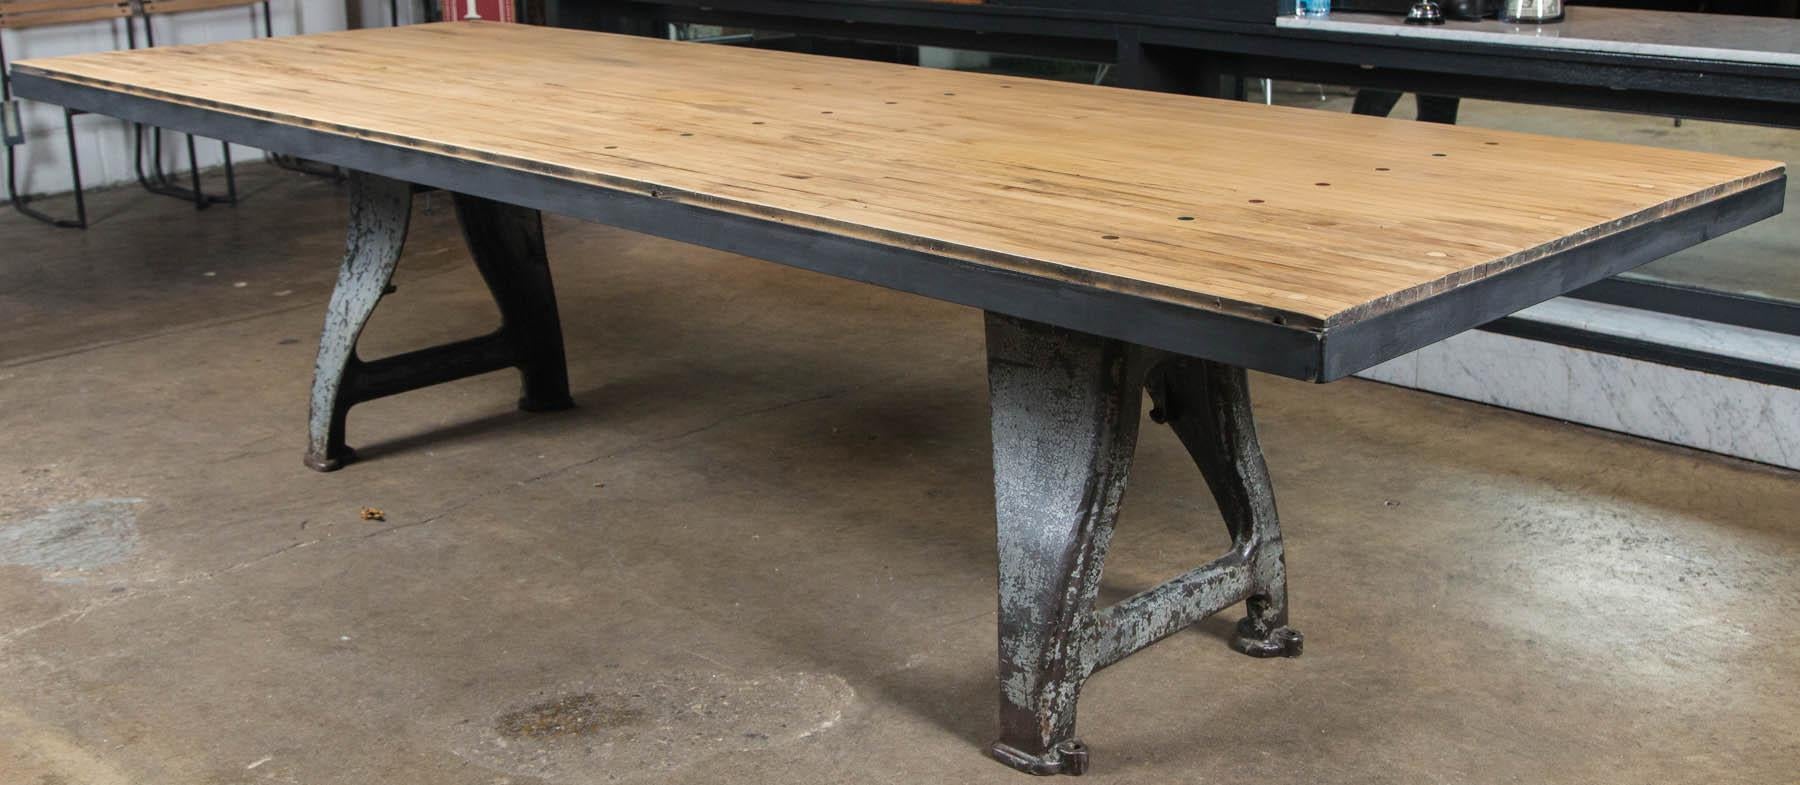 Vintage Industrial Base Bowling Alley Table (Industriell) im Angebot